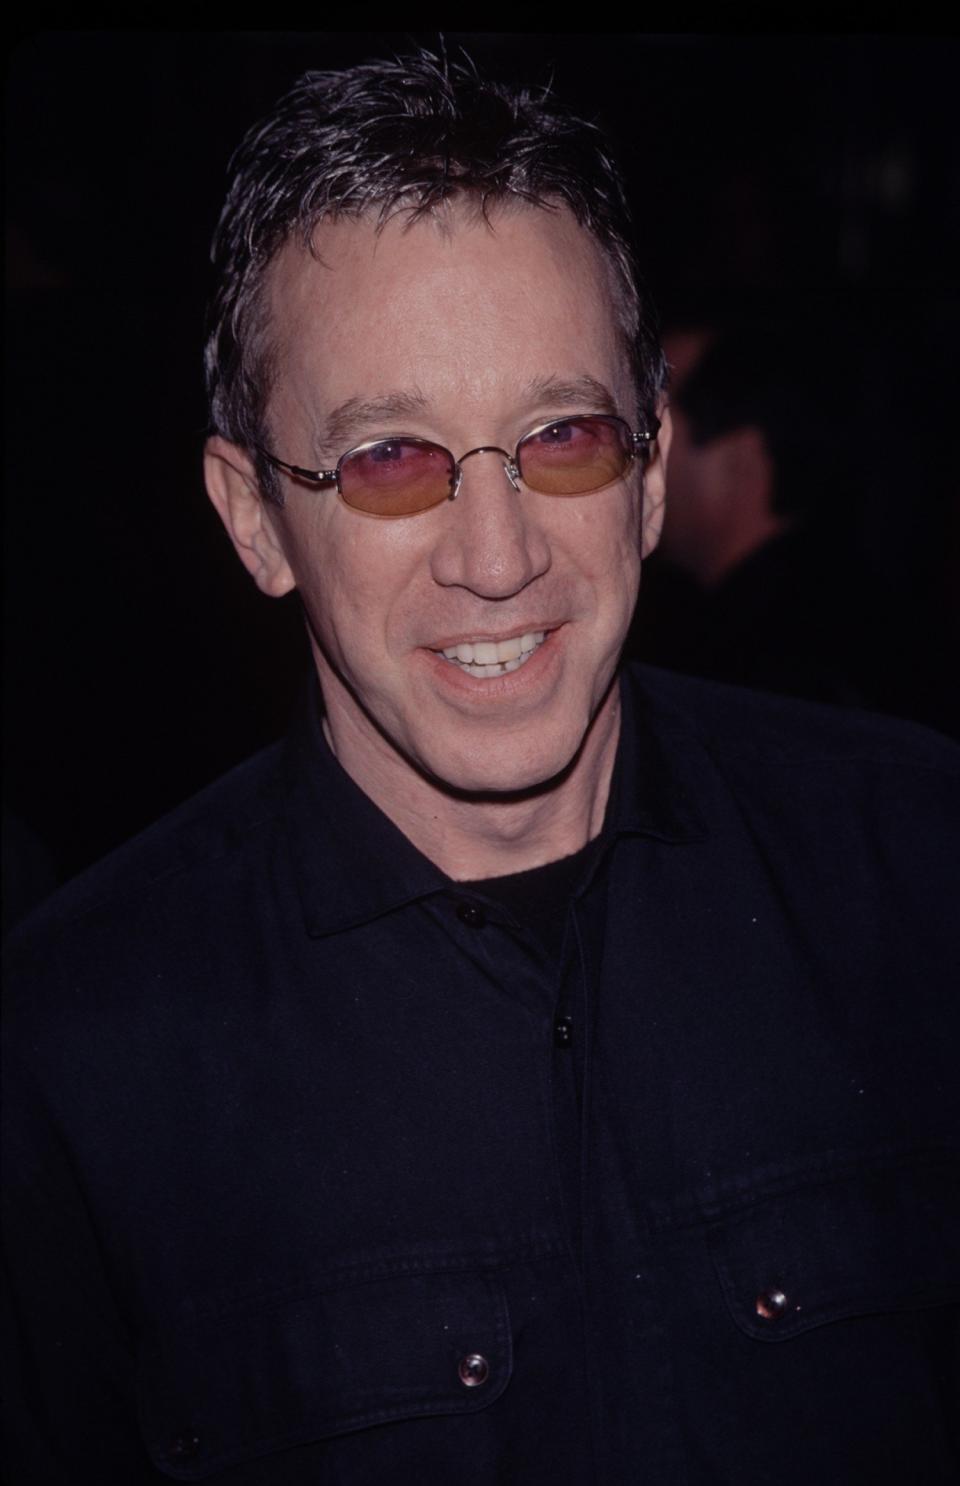 Tim Allen was a cocaine dealer. But after doing two years hard time for drug trafficking, Allen ditched the dope and headed to Hollywood.